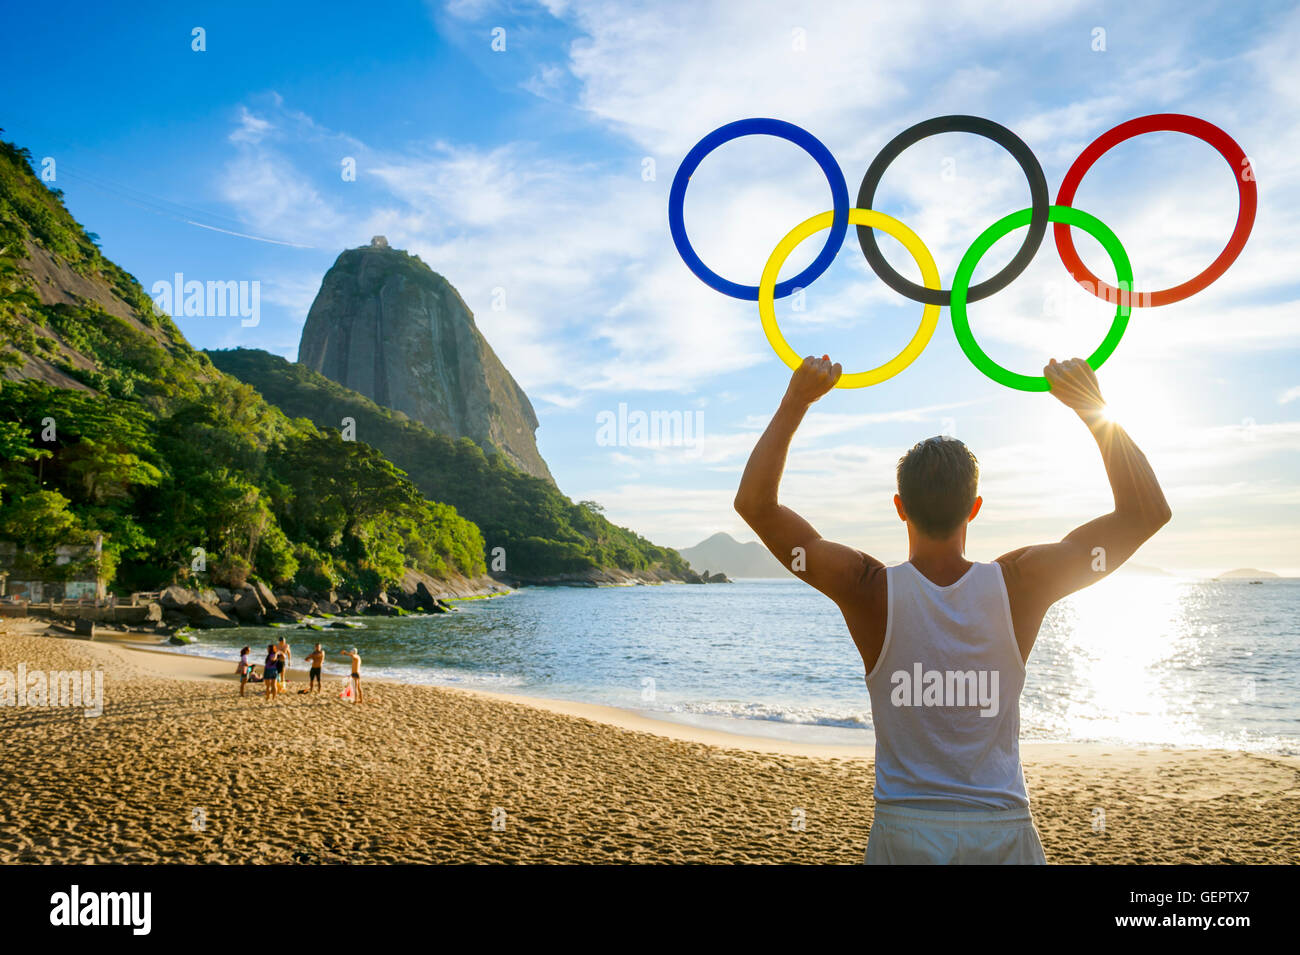 RIO DE JANEIRO - OCTOBER 31, 2015: Athlete holds Olympic rings in front of a sunrise silhouette of Sugarloaf Mountain. Stock Photo